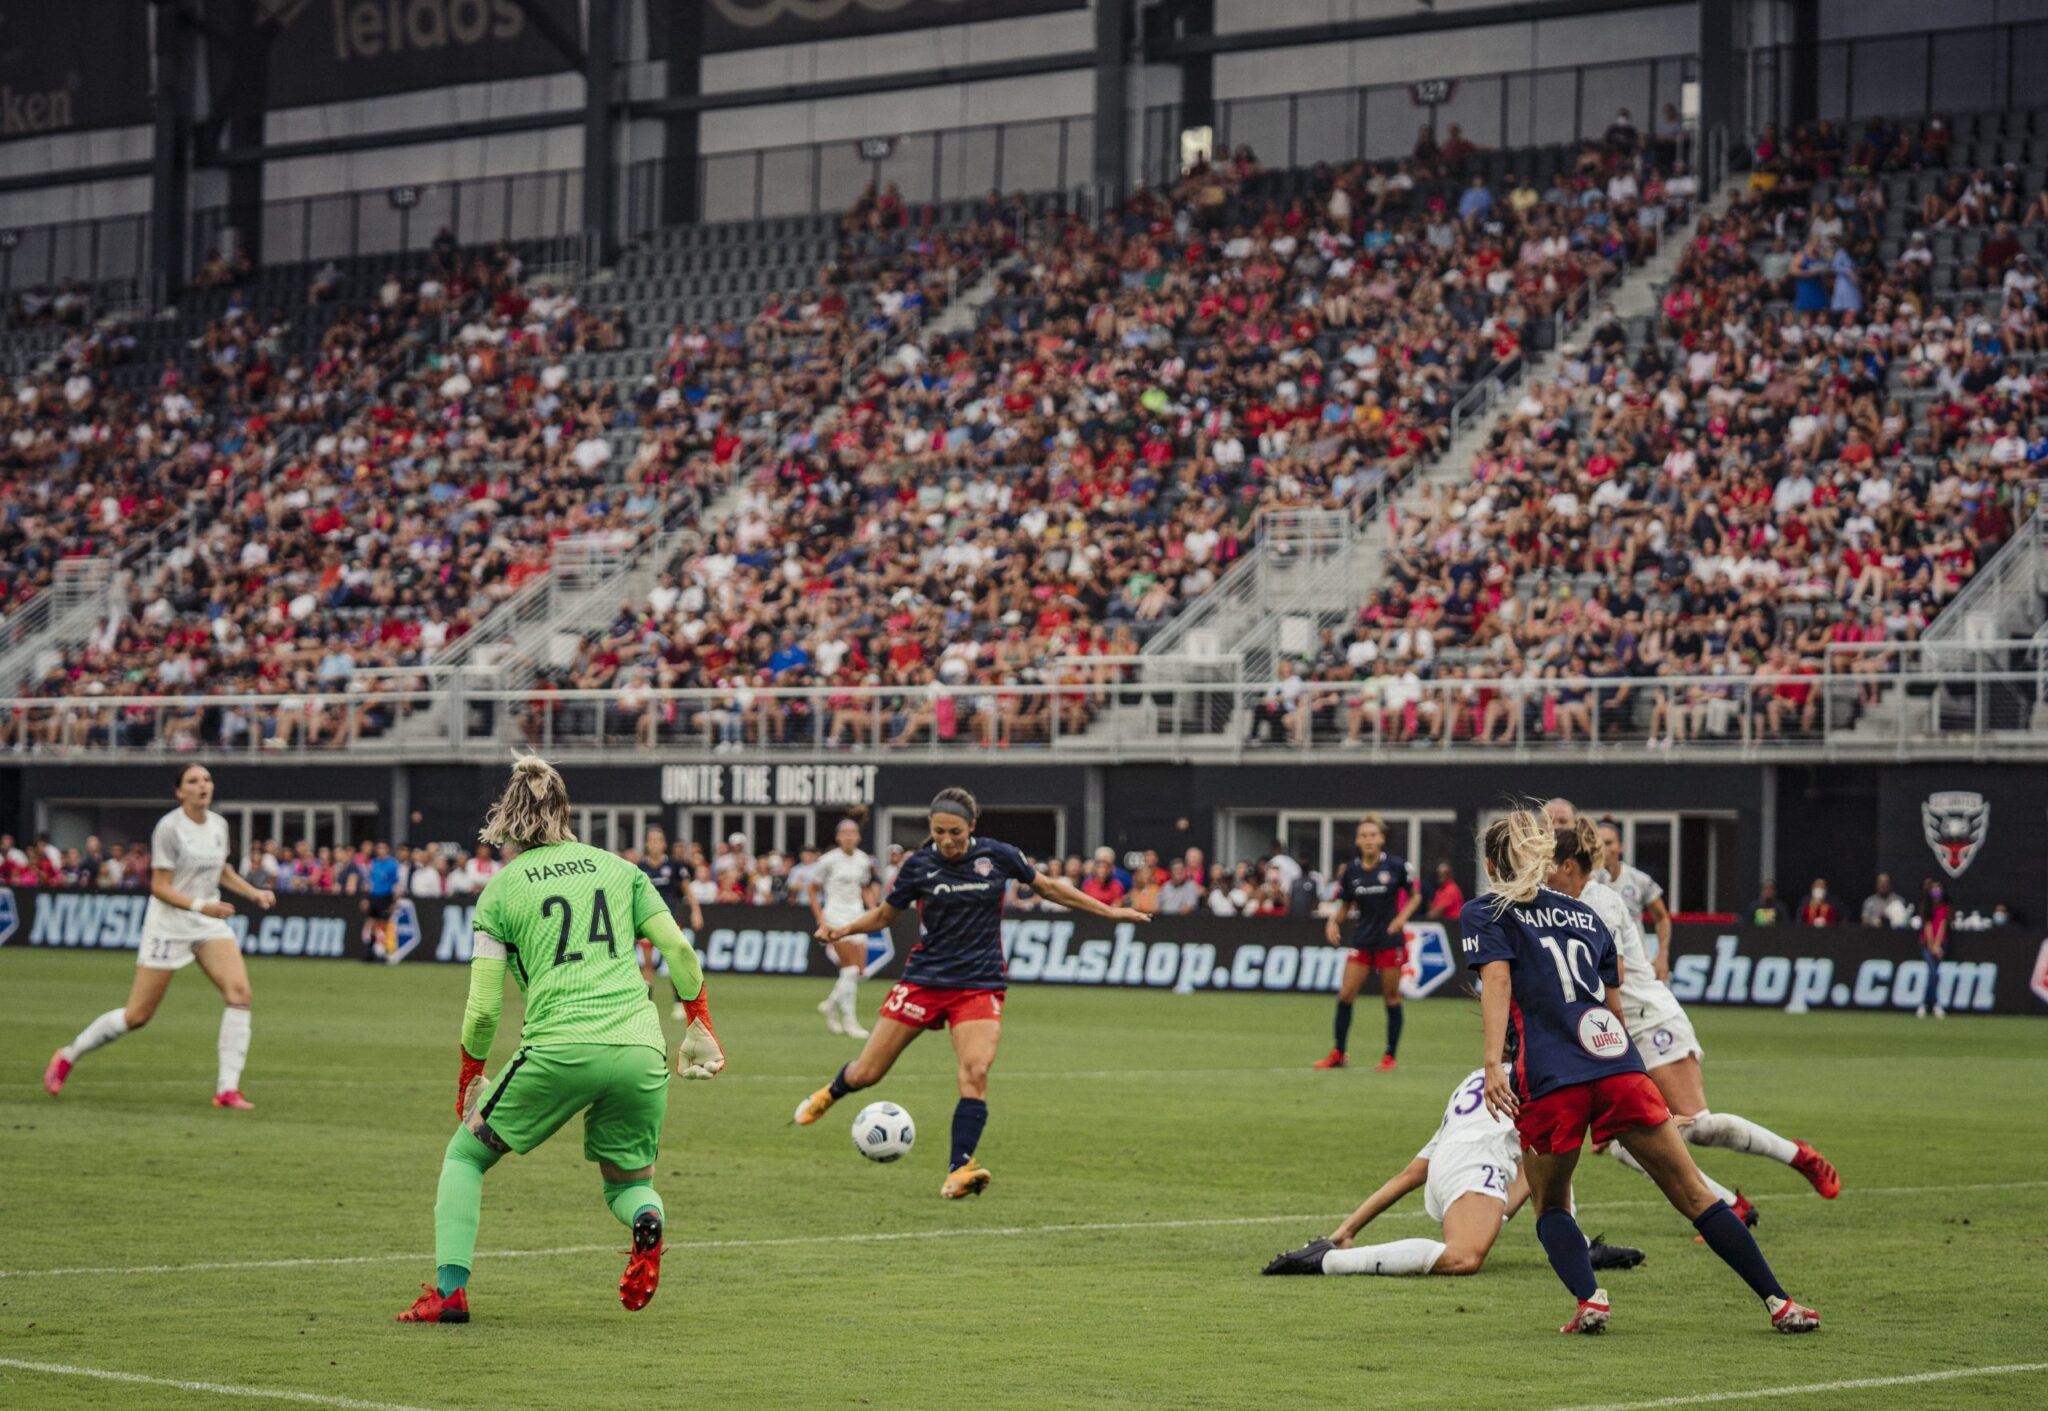 Spirit Hone in on North Carolina Looking to Pick Up Second Straight Win at Audi Featured Image